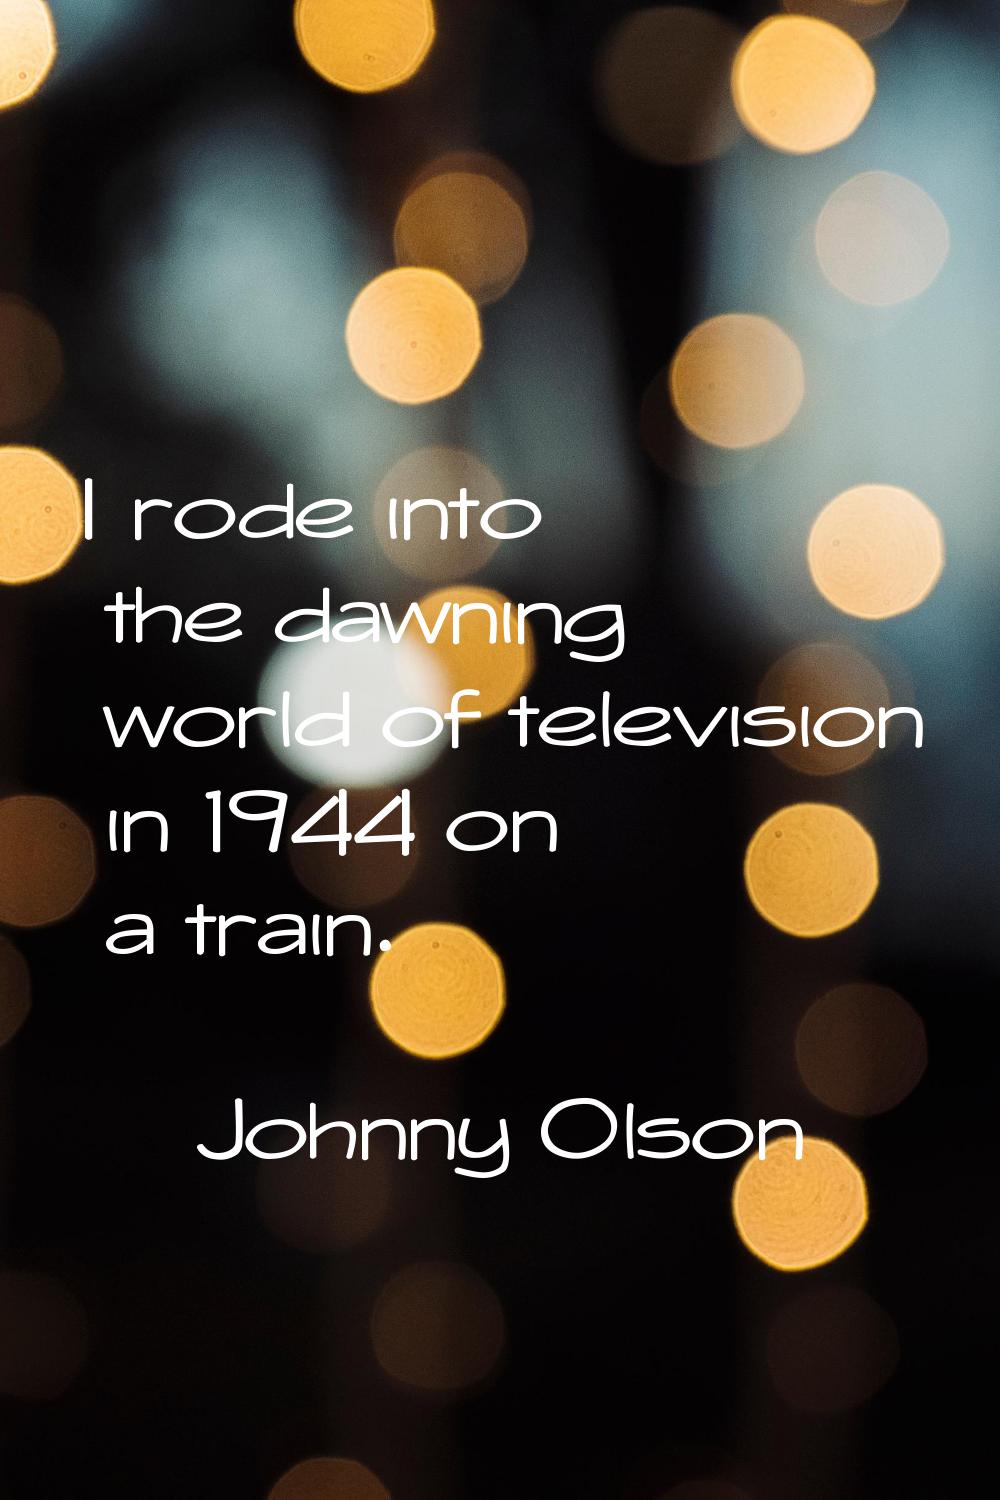 I rode into the dawning world of television in 1944 on a train.